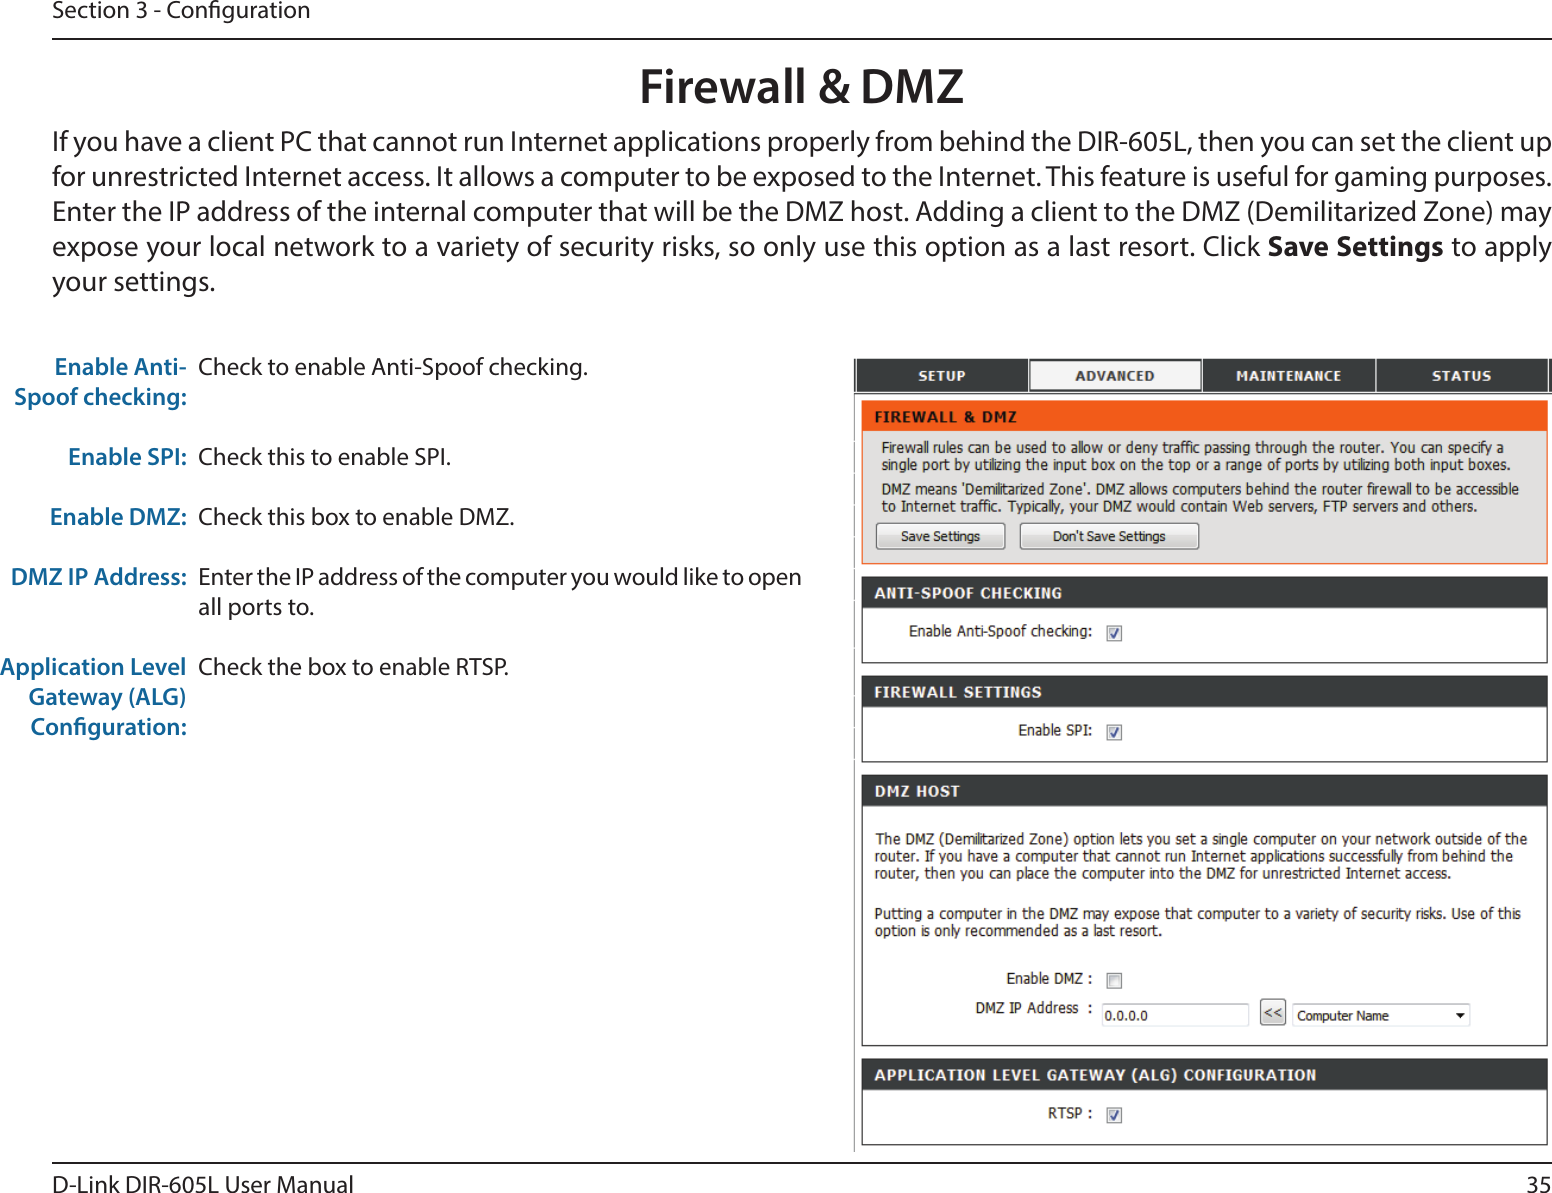 35D-Link DIR-605L User ManualSection 3 - CongurationFirewall &amp; DMZIf you have a client PC that cannot run Internet applications properly from behind the DIR-605L, then you can set the client up for unrestricted Internet access. It allows a computer to be exposed to the Internet. This feature is useful for gaming purposes. Enter the IP address of the internal computer that will be the DMZ host. Adding a client to the DMZ (Demilitarized Zone) may expose your local network to a variety of security risks, so only use this option as a last resort. Click Save Settings to apply your settings.Check to enable Anti-Spoof checking.Check this to enable SPI.Check this box to enable DMZ.Enter the IP address of the computer you would like to open all ports to.Check the box to enable RTSP.Enable Anti-Spoof checking: Enable SPI:   Enable DMZ:DMZ IP Address:Application Level Gateway (ALG) Conguration: